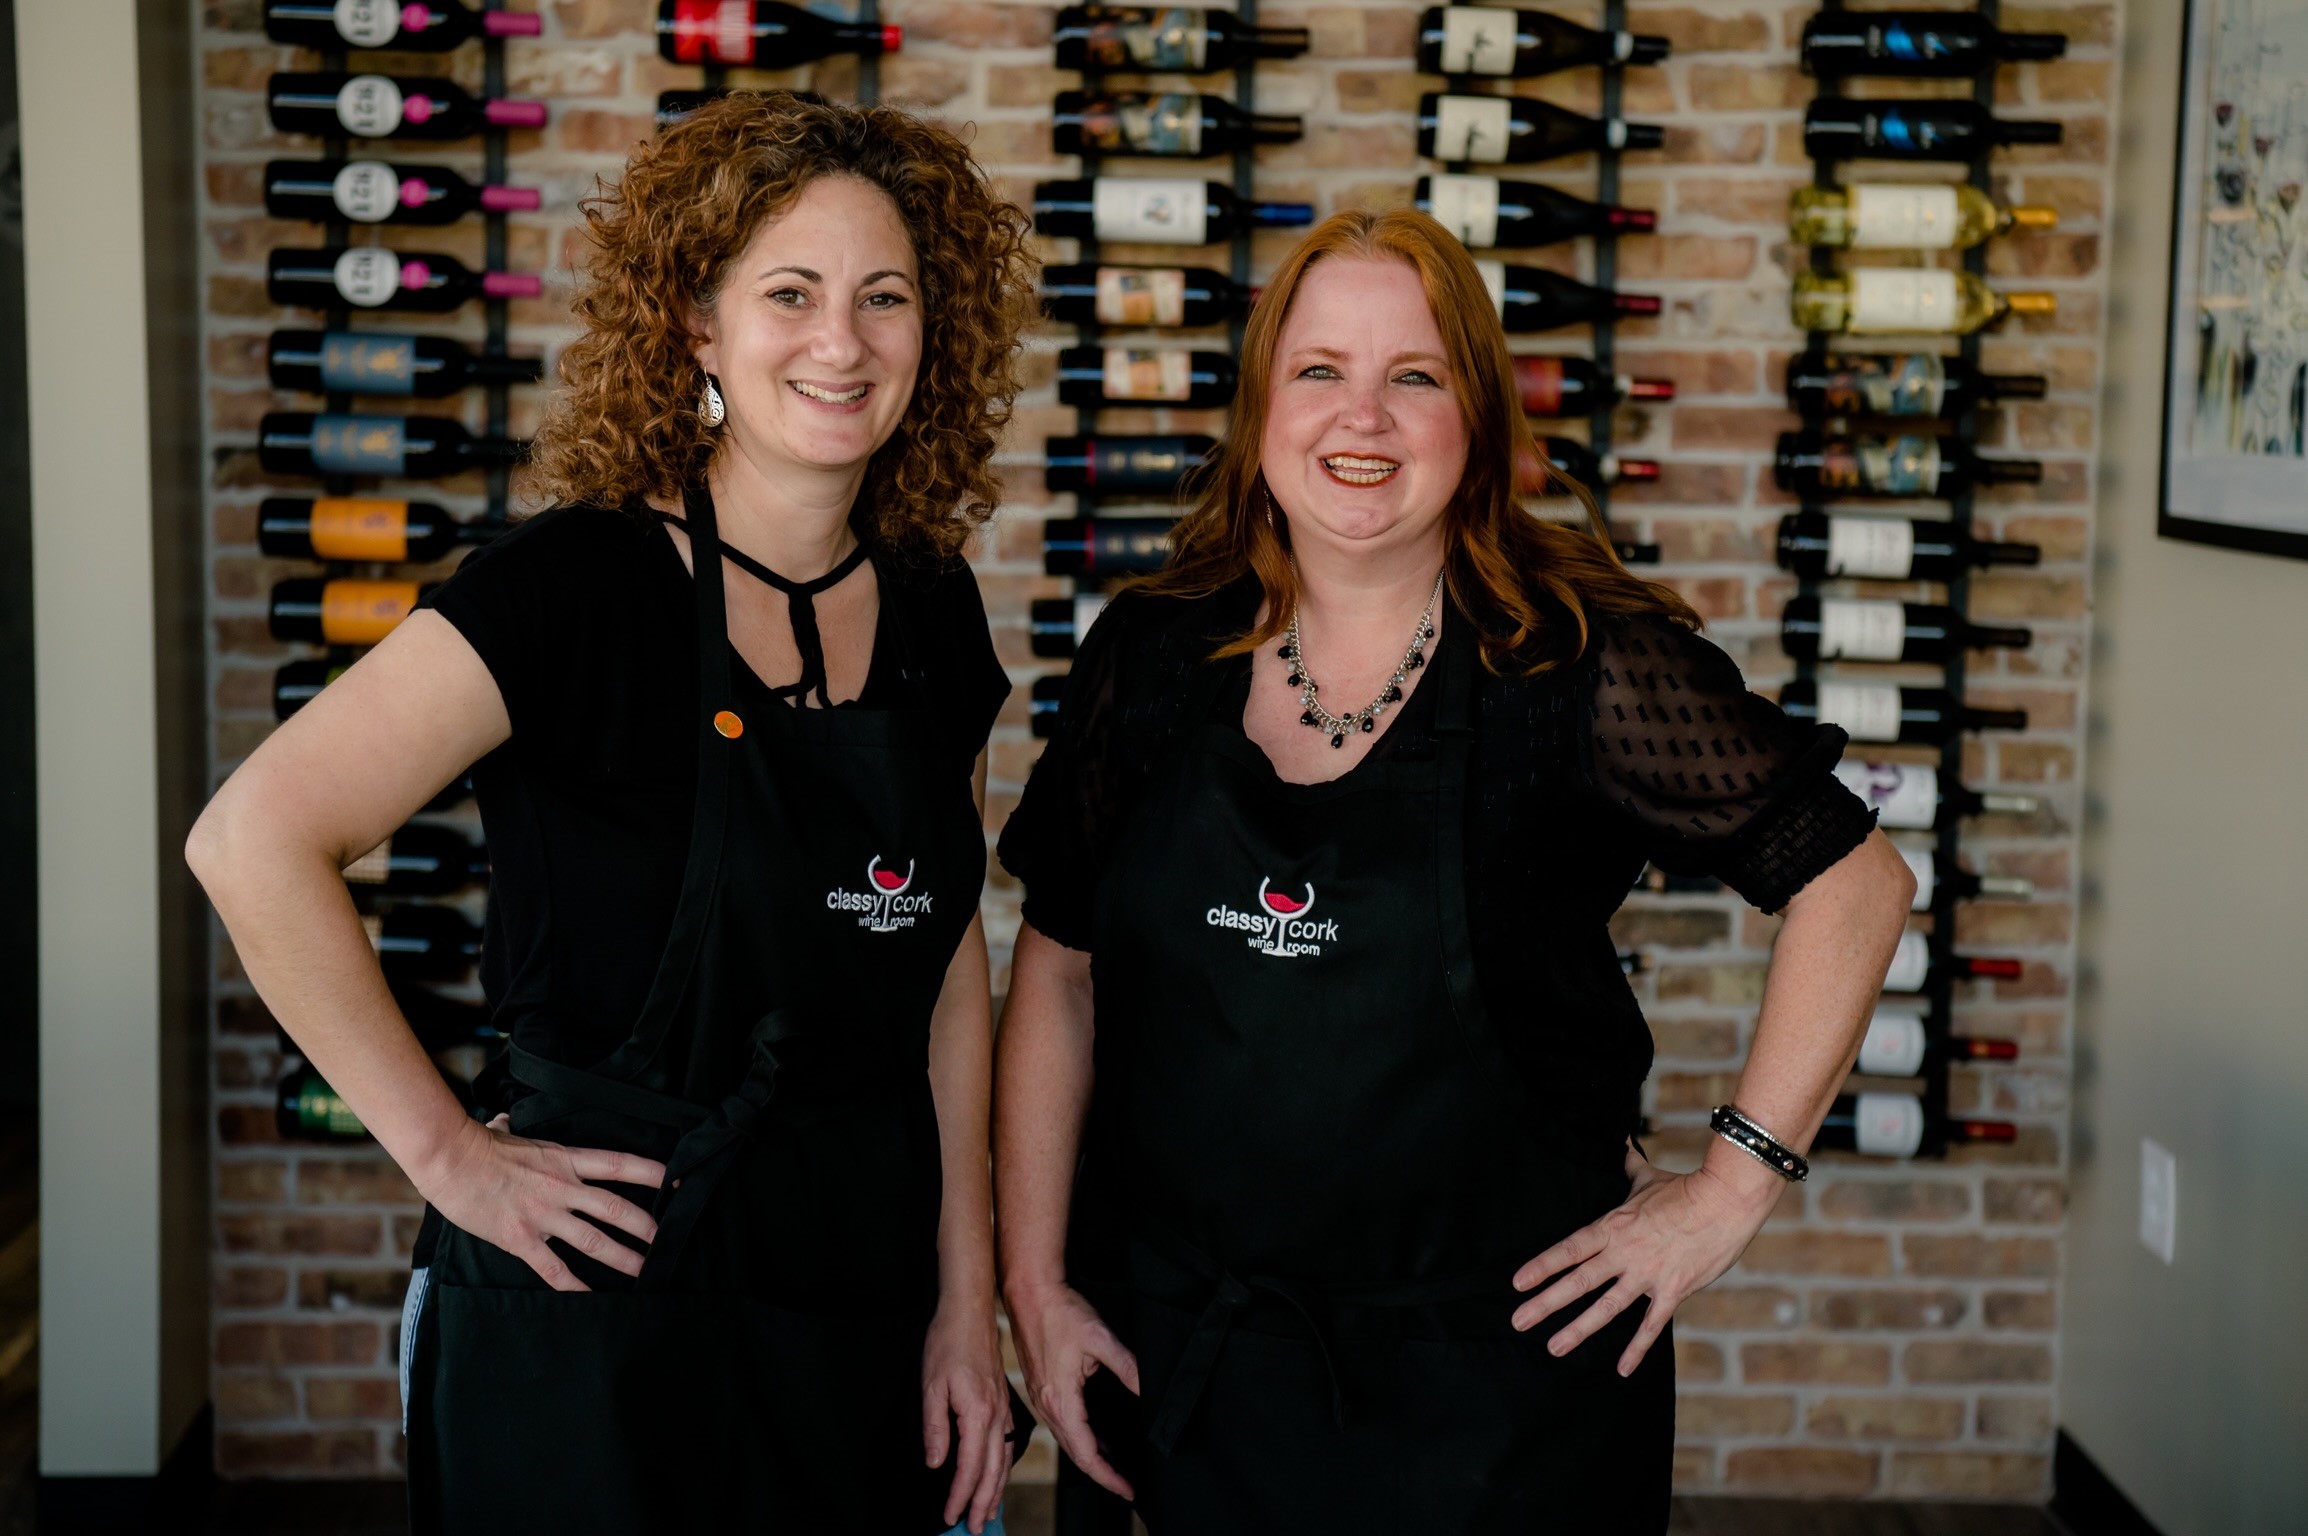 Angela and Alicia - Owners of The Classy Cork